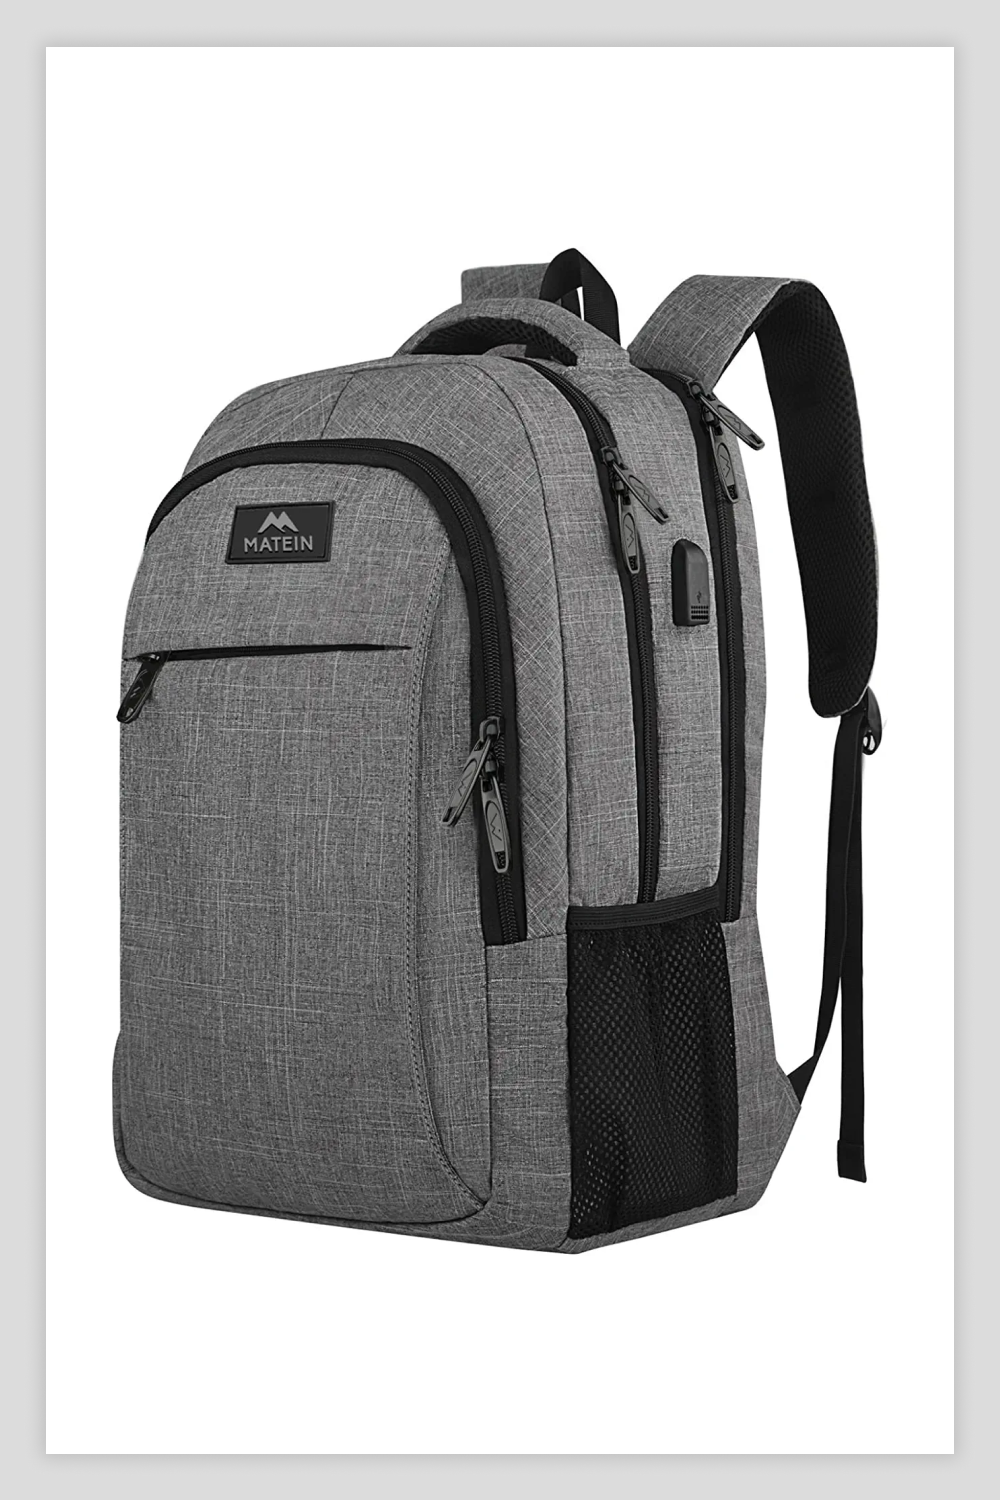 Matein Travel Laptop Backpack, Business Anti Theft Slim Durable Laptops Backpack.